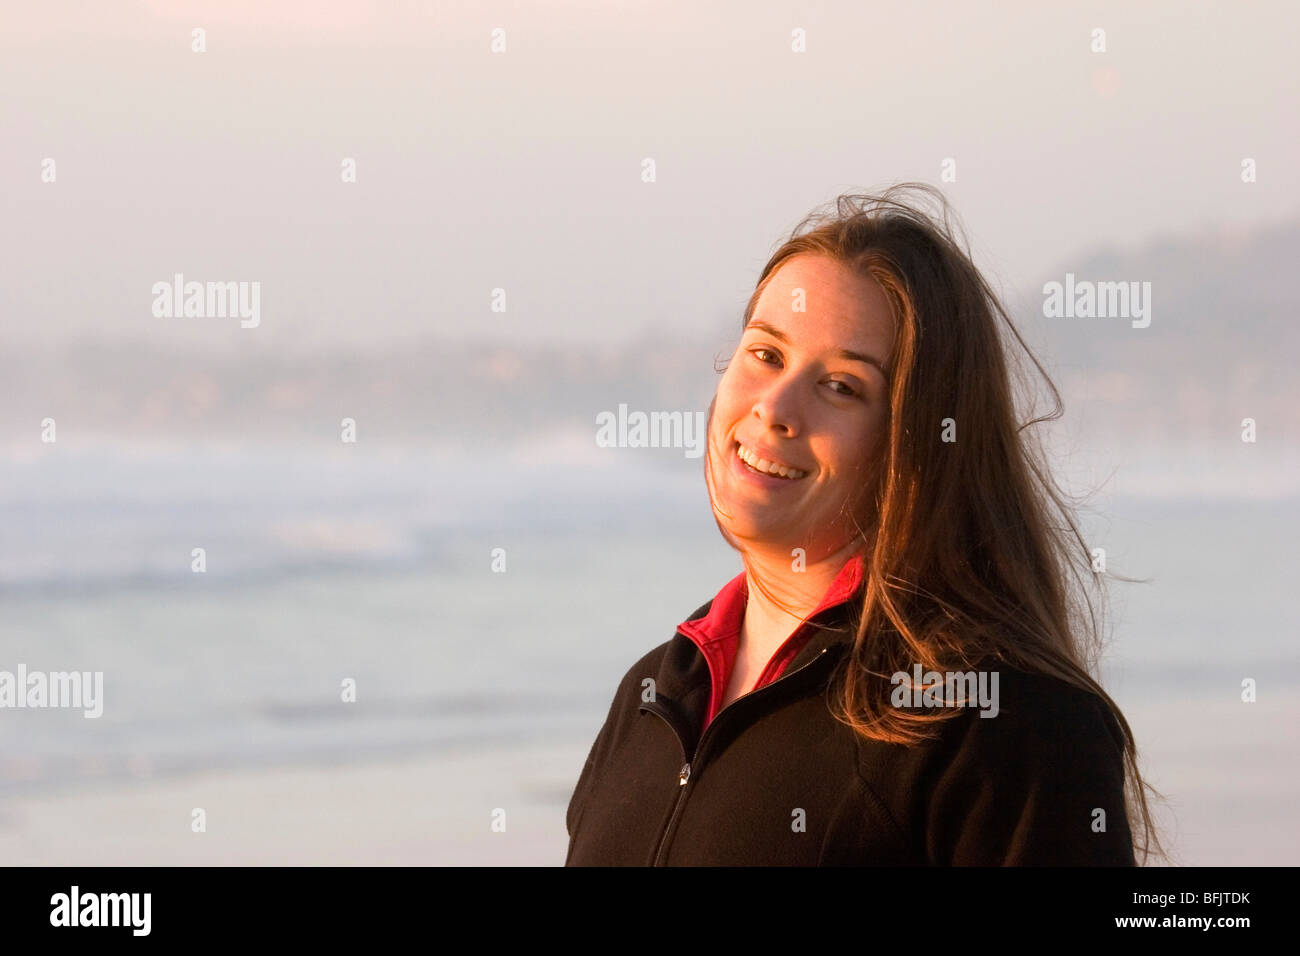 Head shot of a pretty young woman on a beach at sunset with her hair blowing in the wind and a big smile on her face. Stock Photo